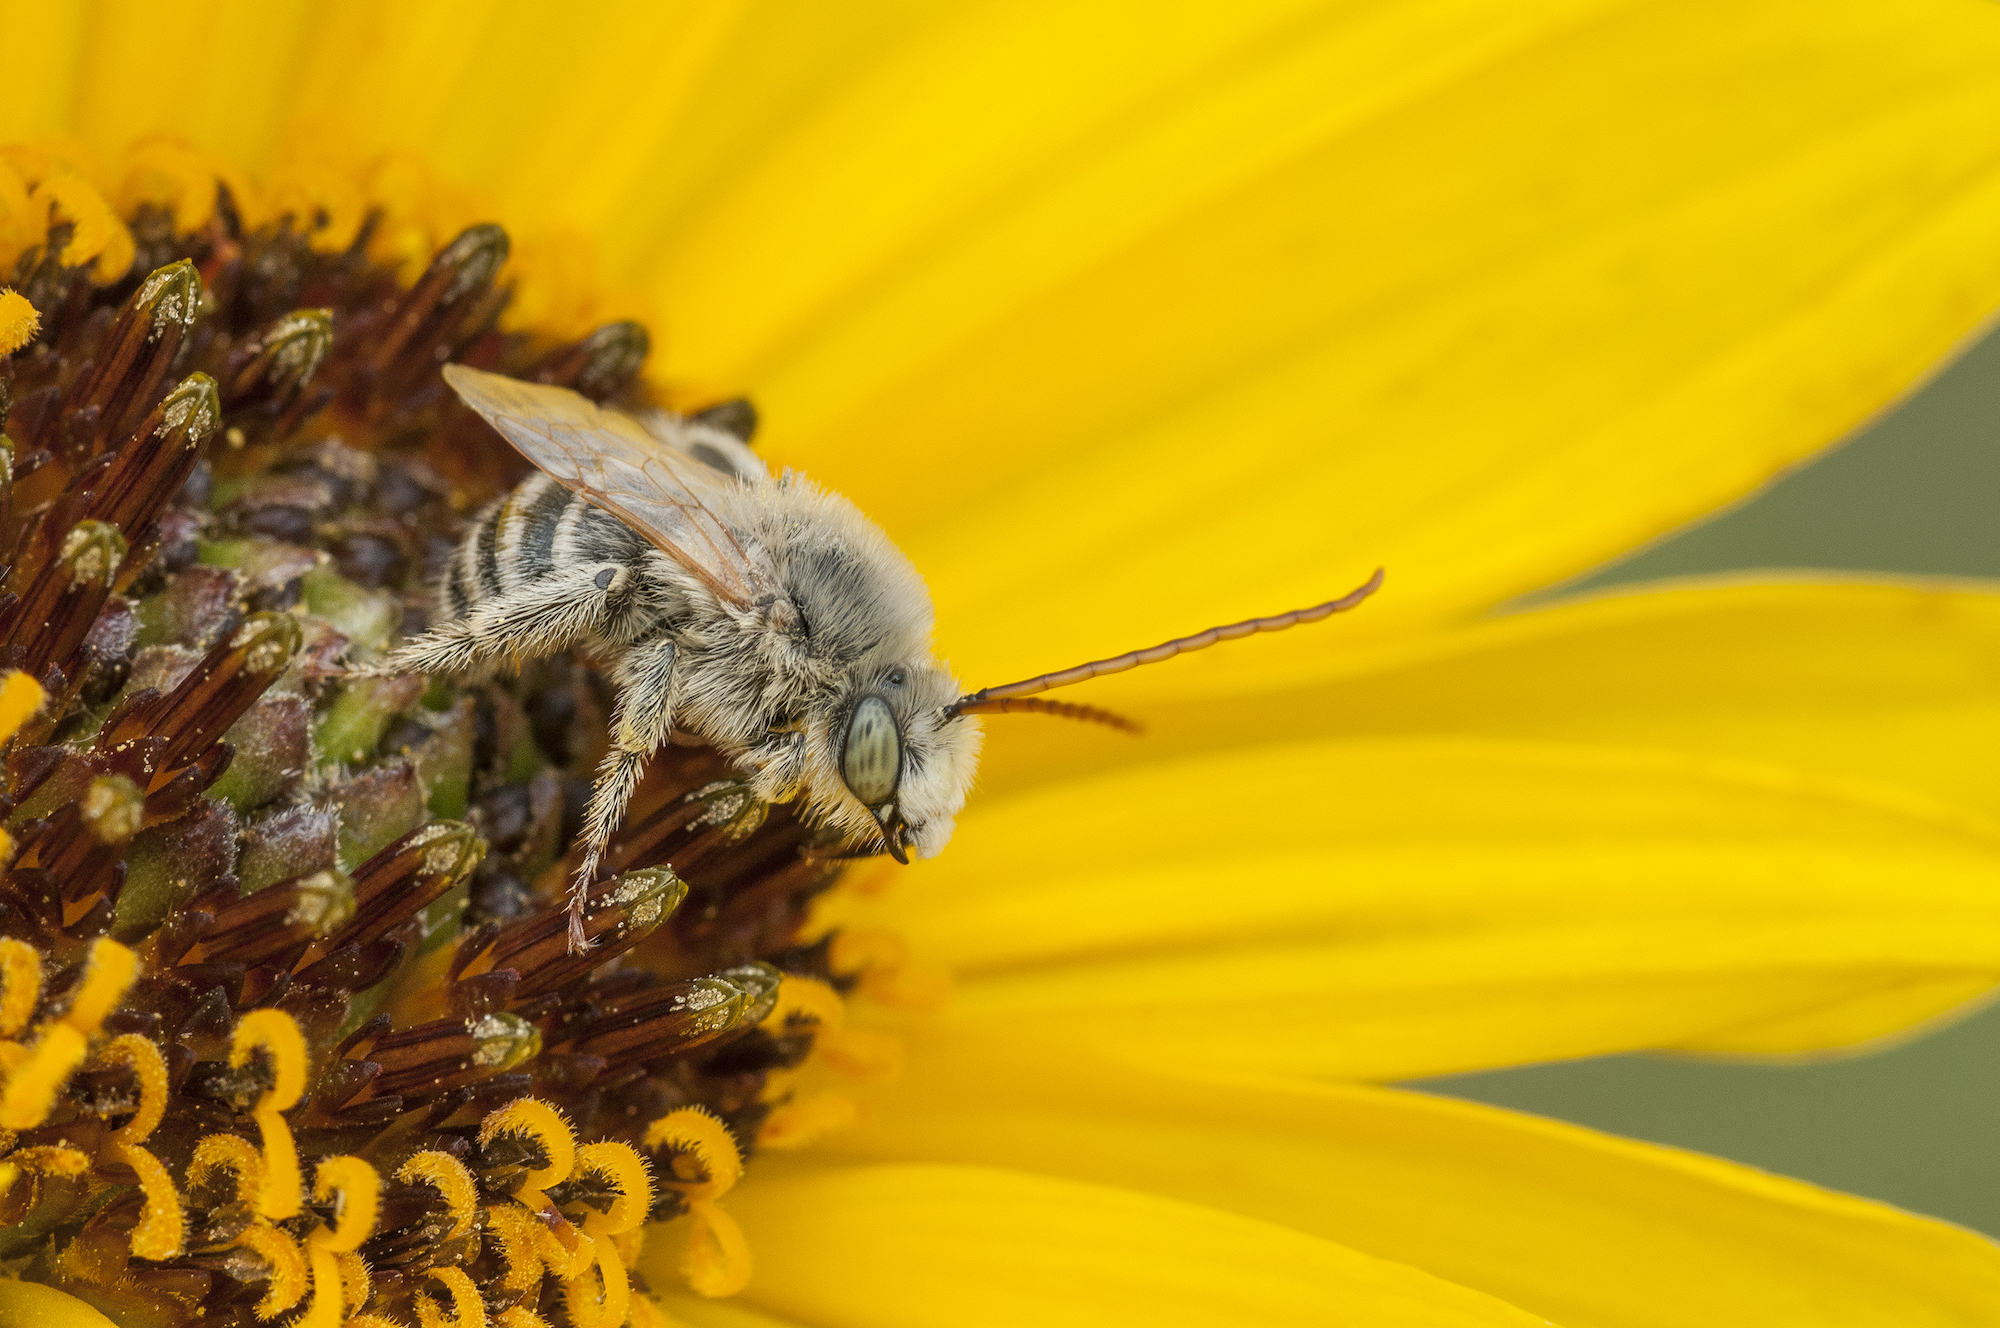 Are honey bees, wild bees still in trouble?